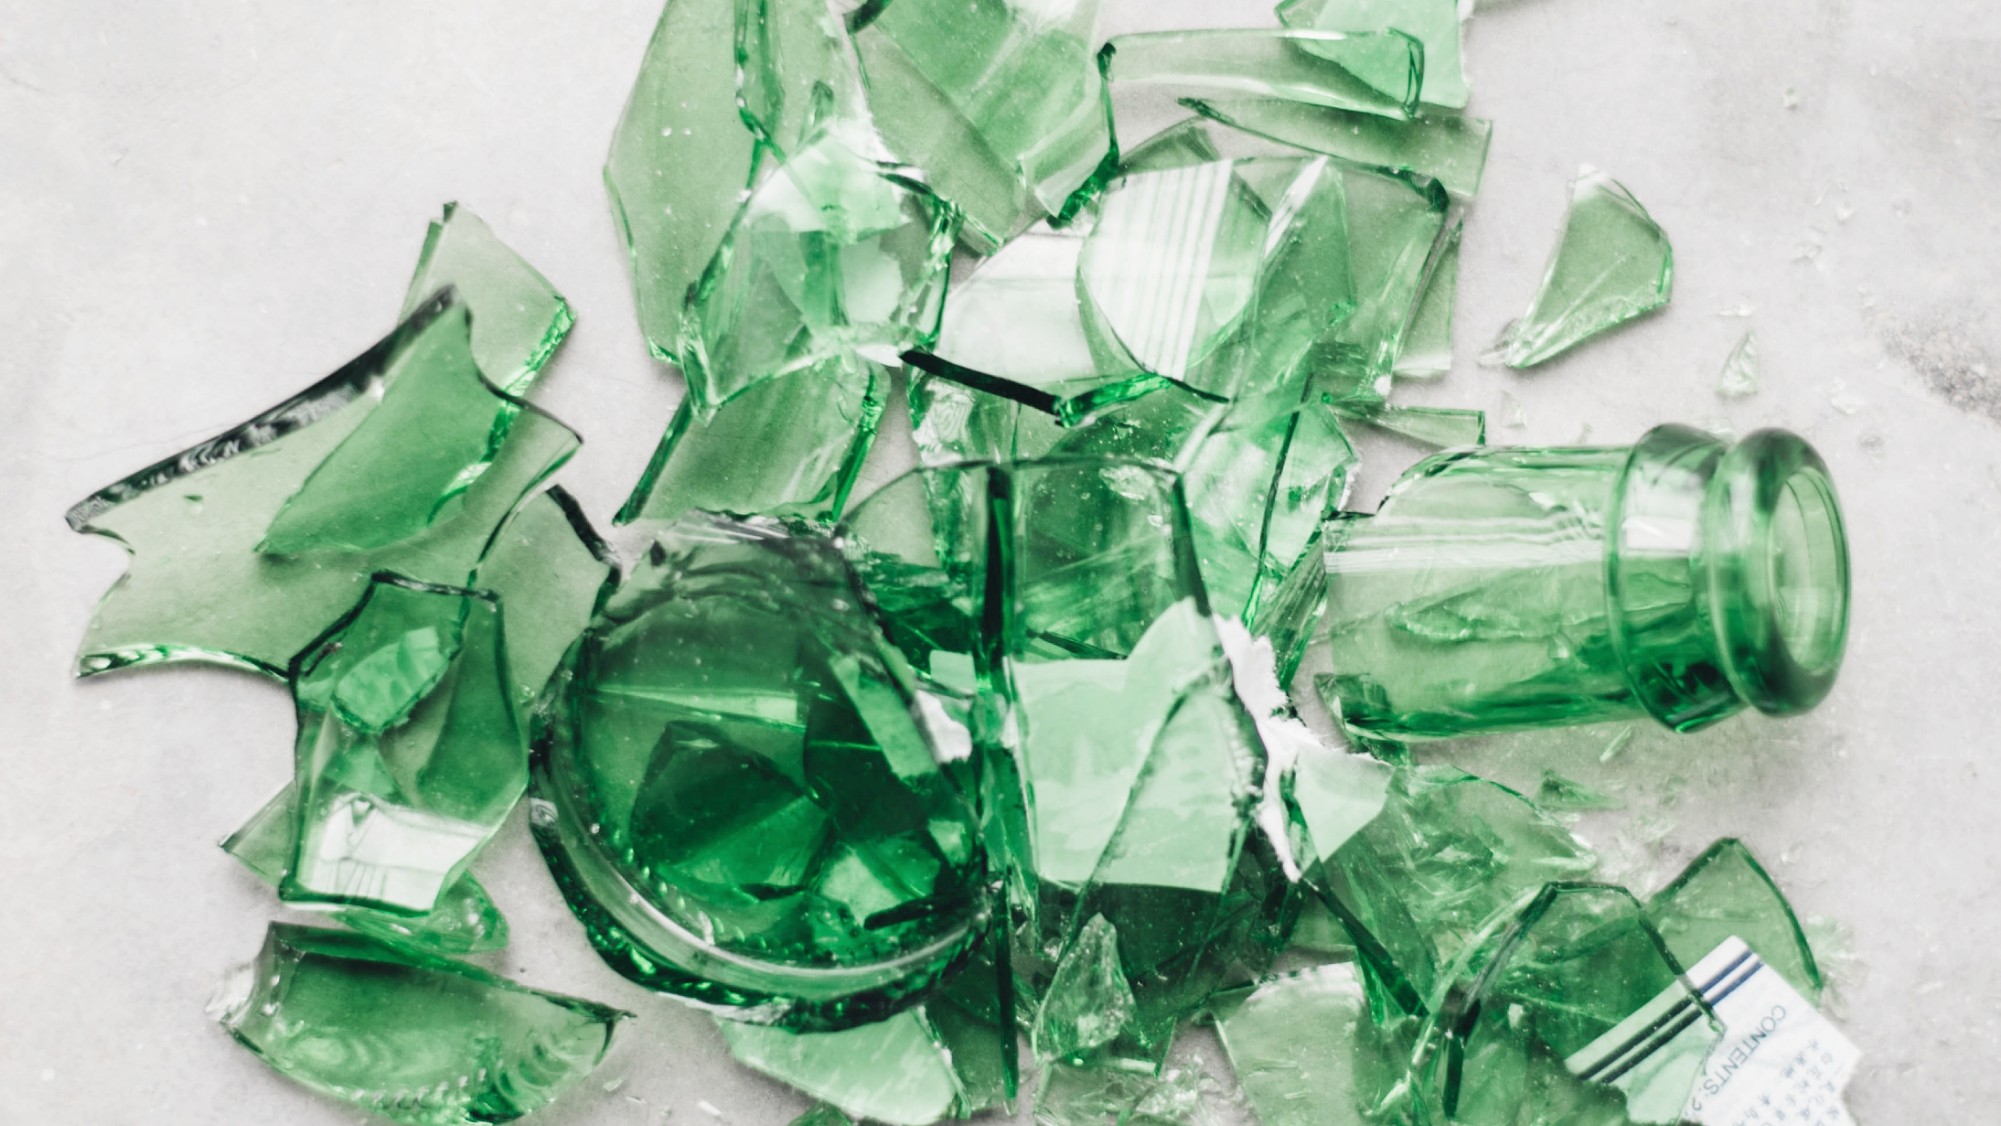 a green glass bottle broken into pieces on a white floor